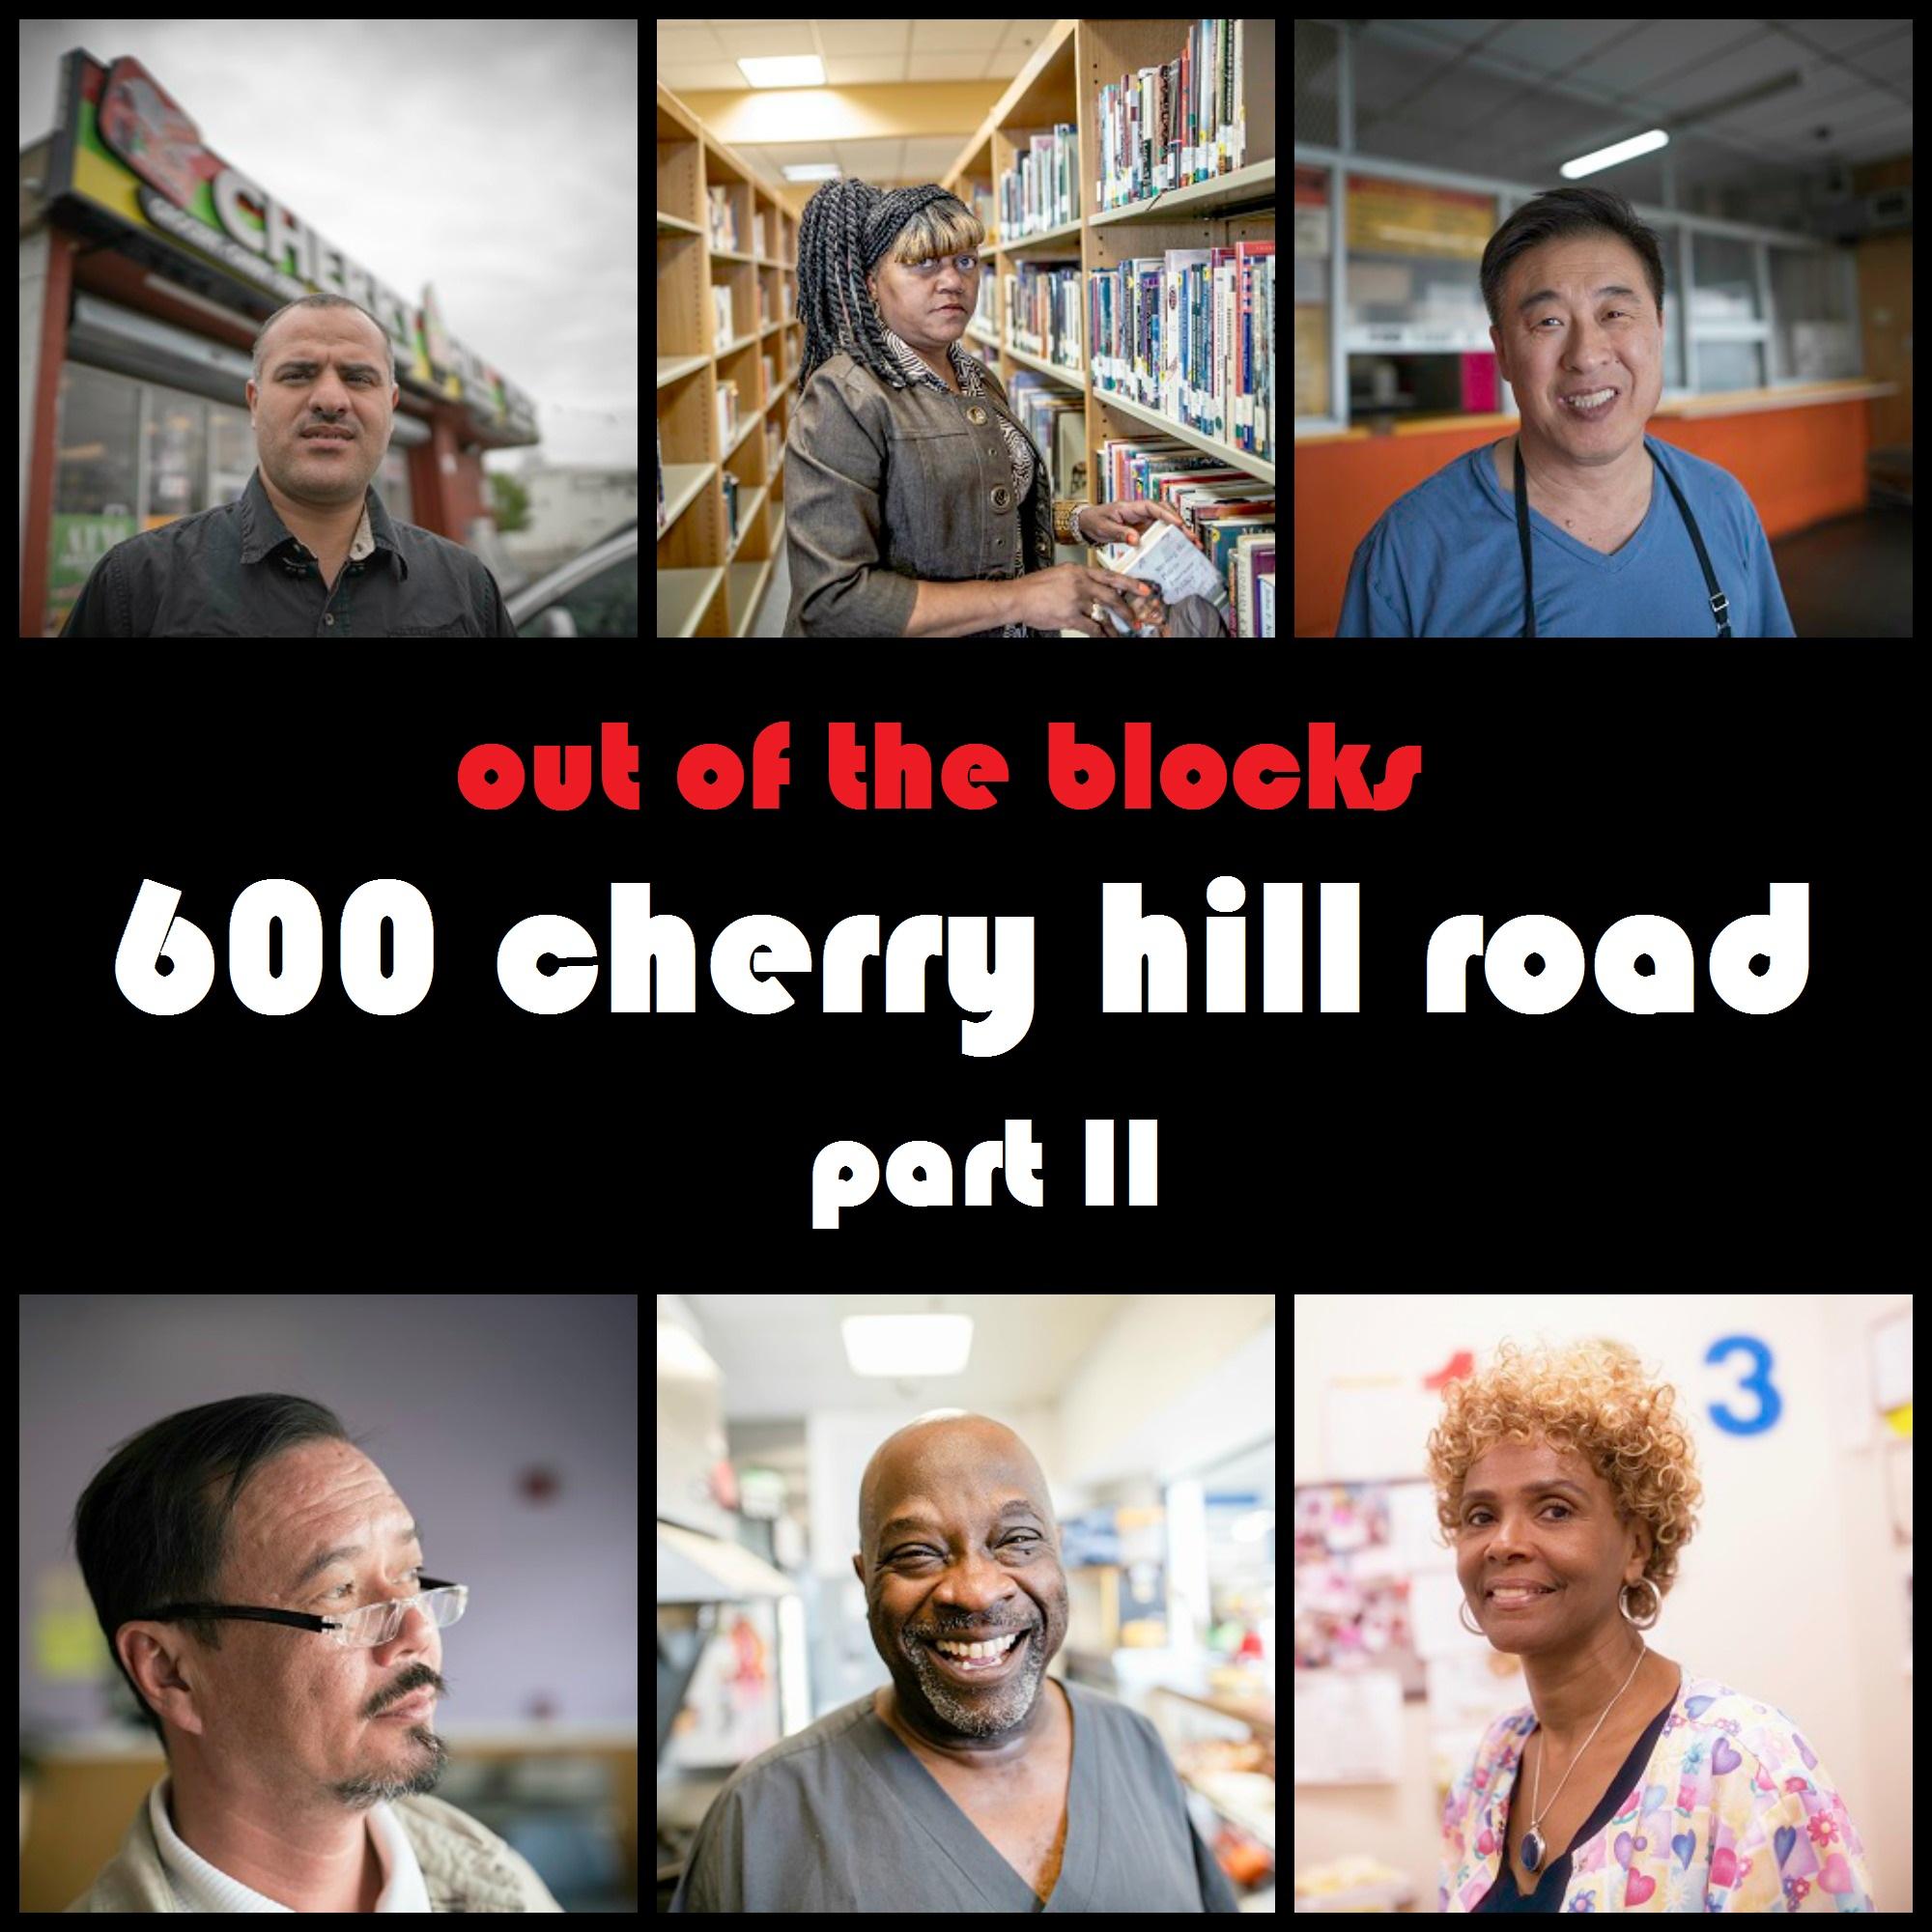 Thumbnail for "600 Cherry Hill Road, Part II".